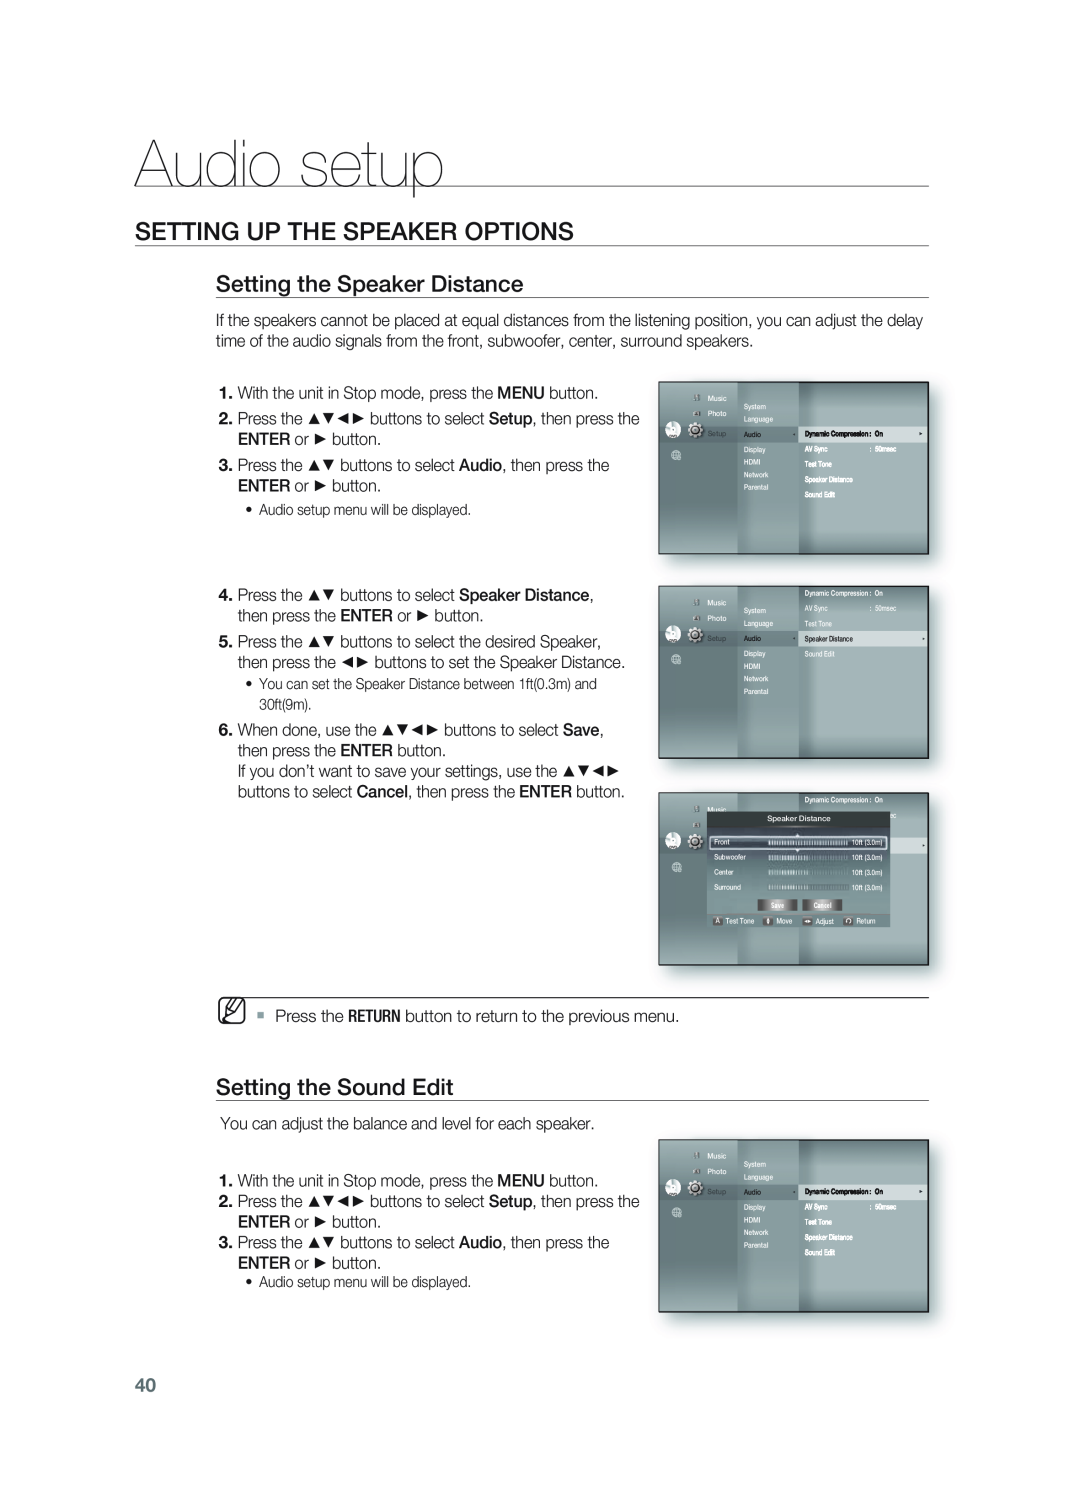 Samsung HT-BD1255 Setting the Speaker Distance, Setting the Sound Edit, Audio setup, Setting Up The Speaker Options 